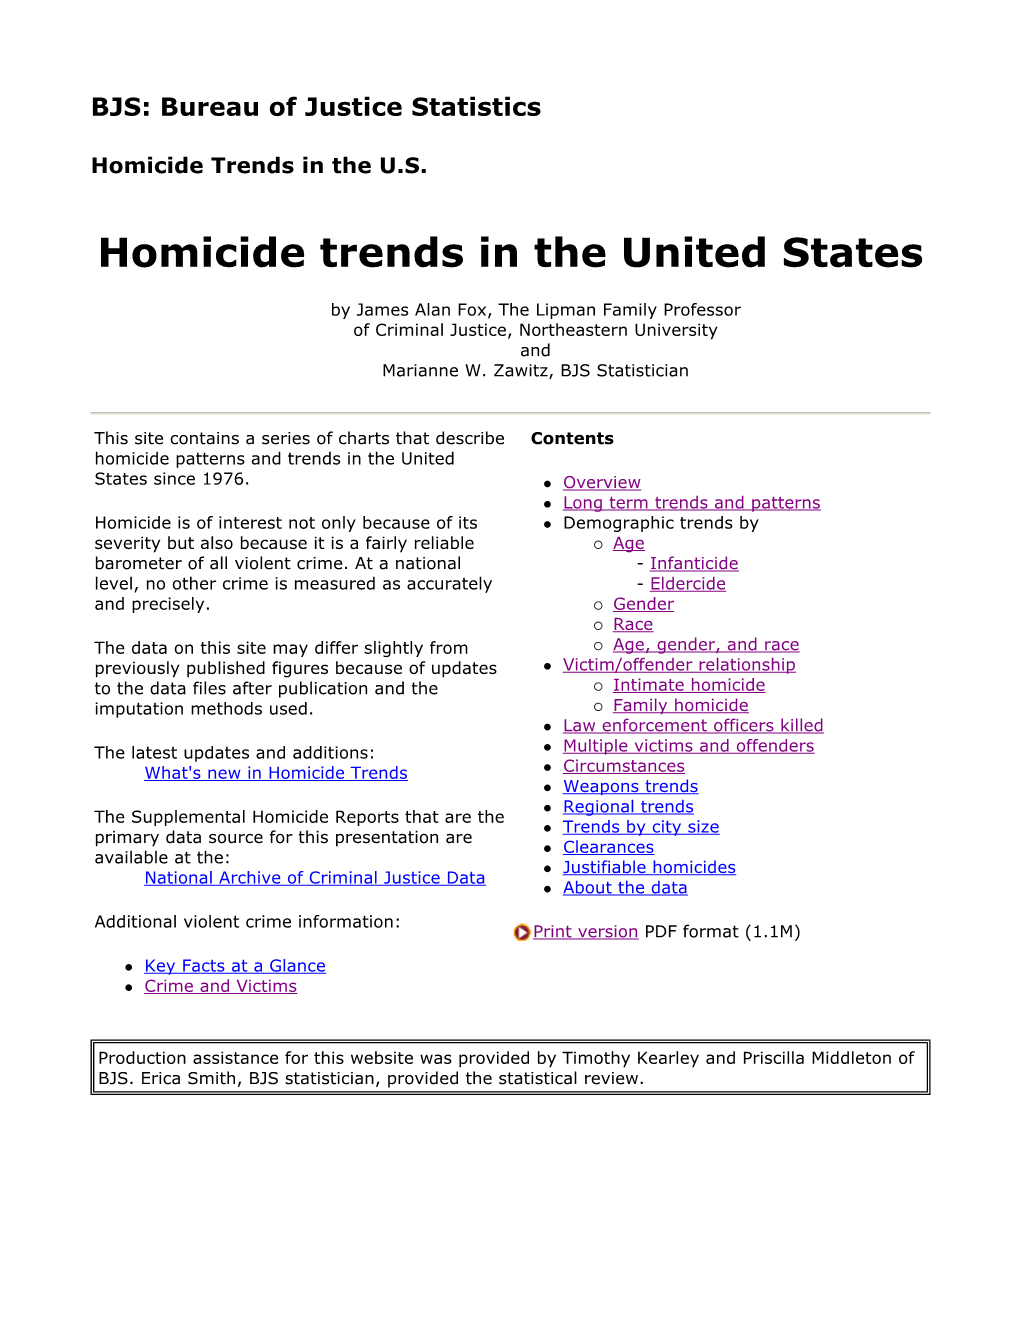 Homicide Trends in the United States